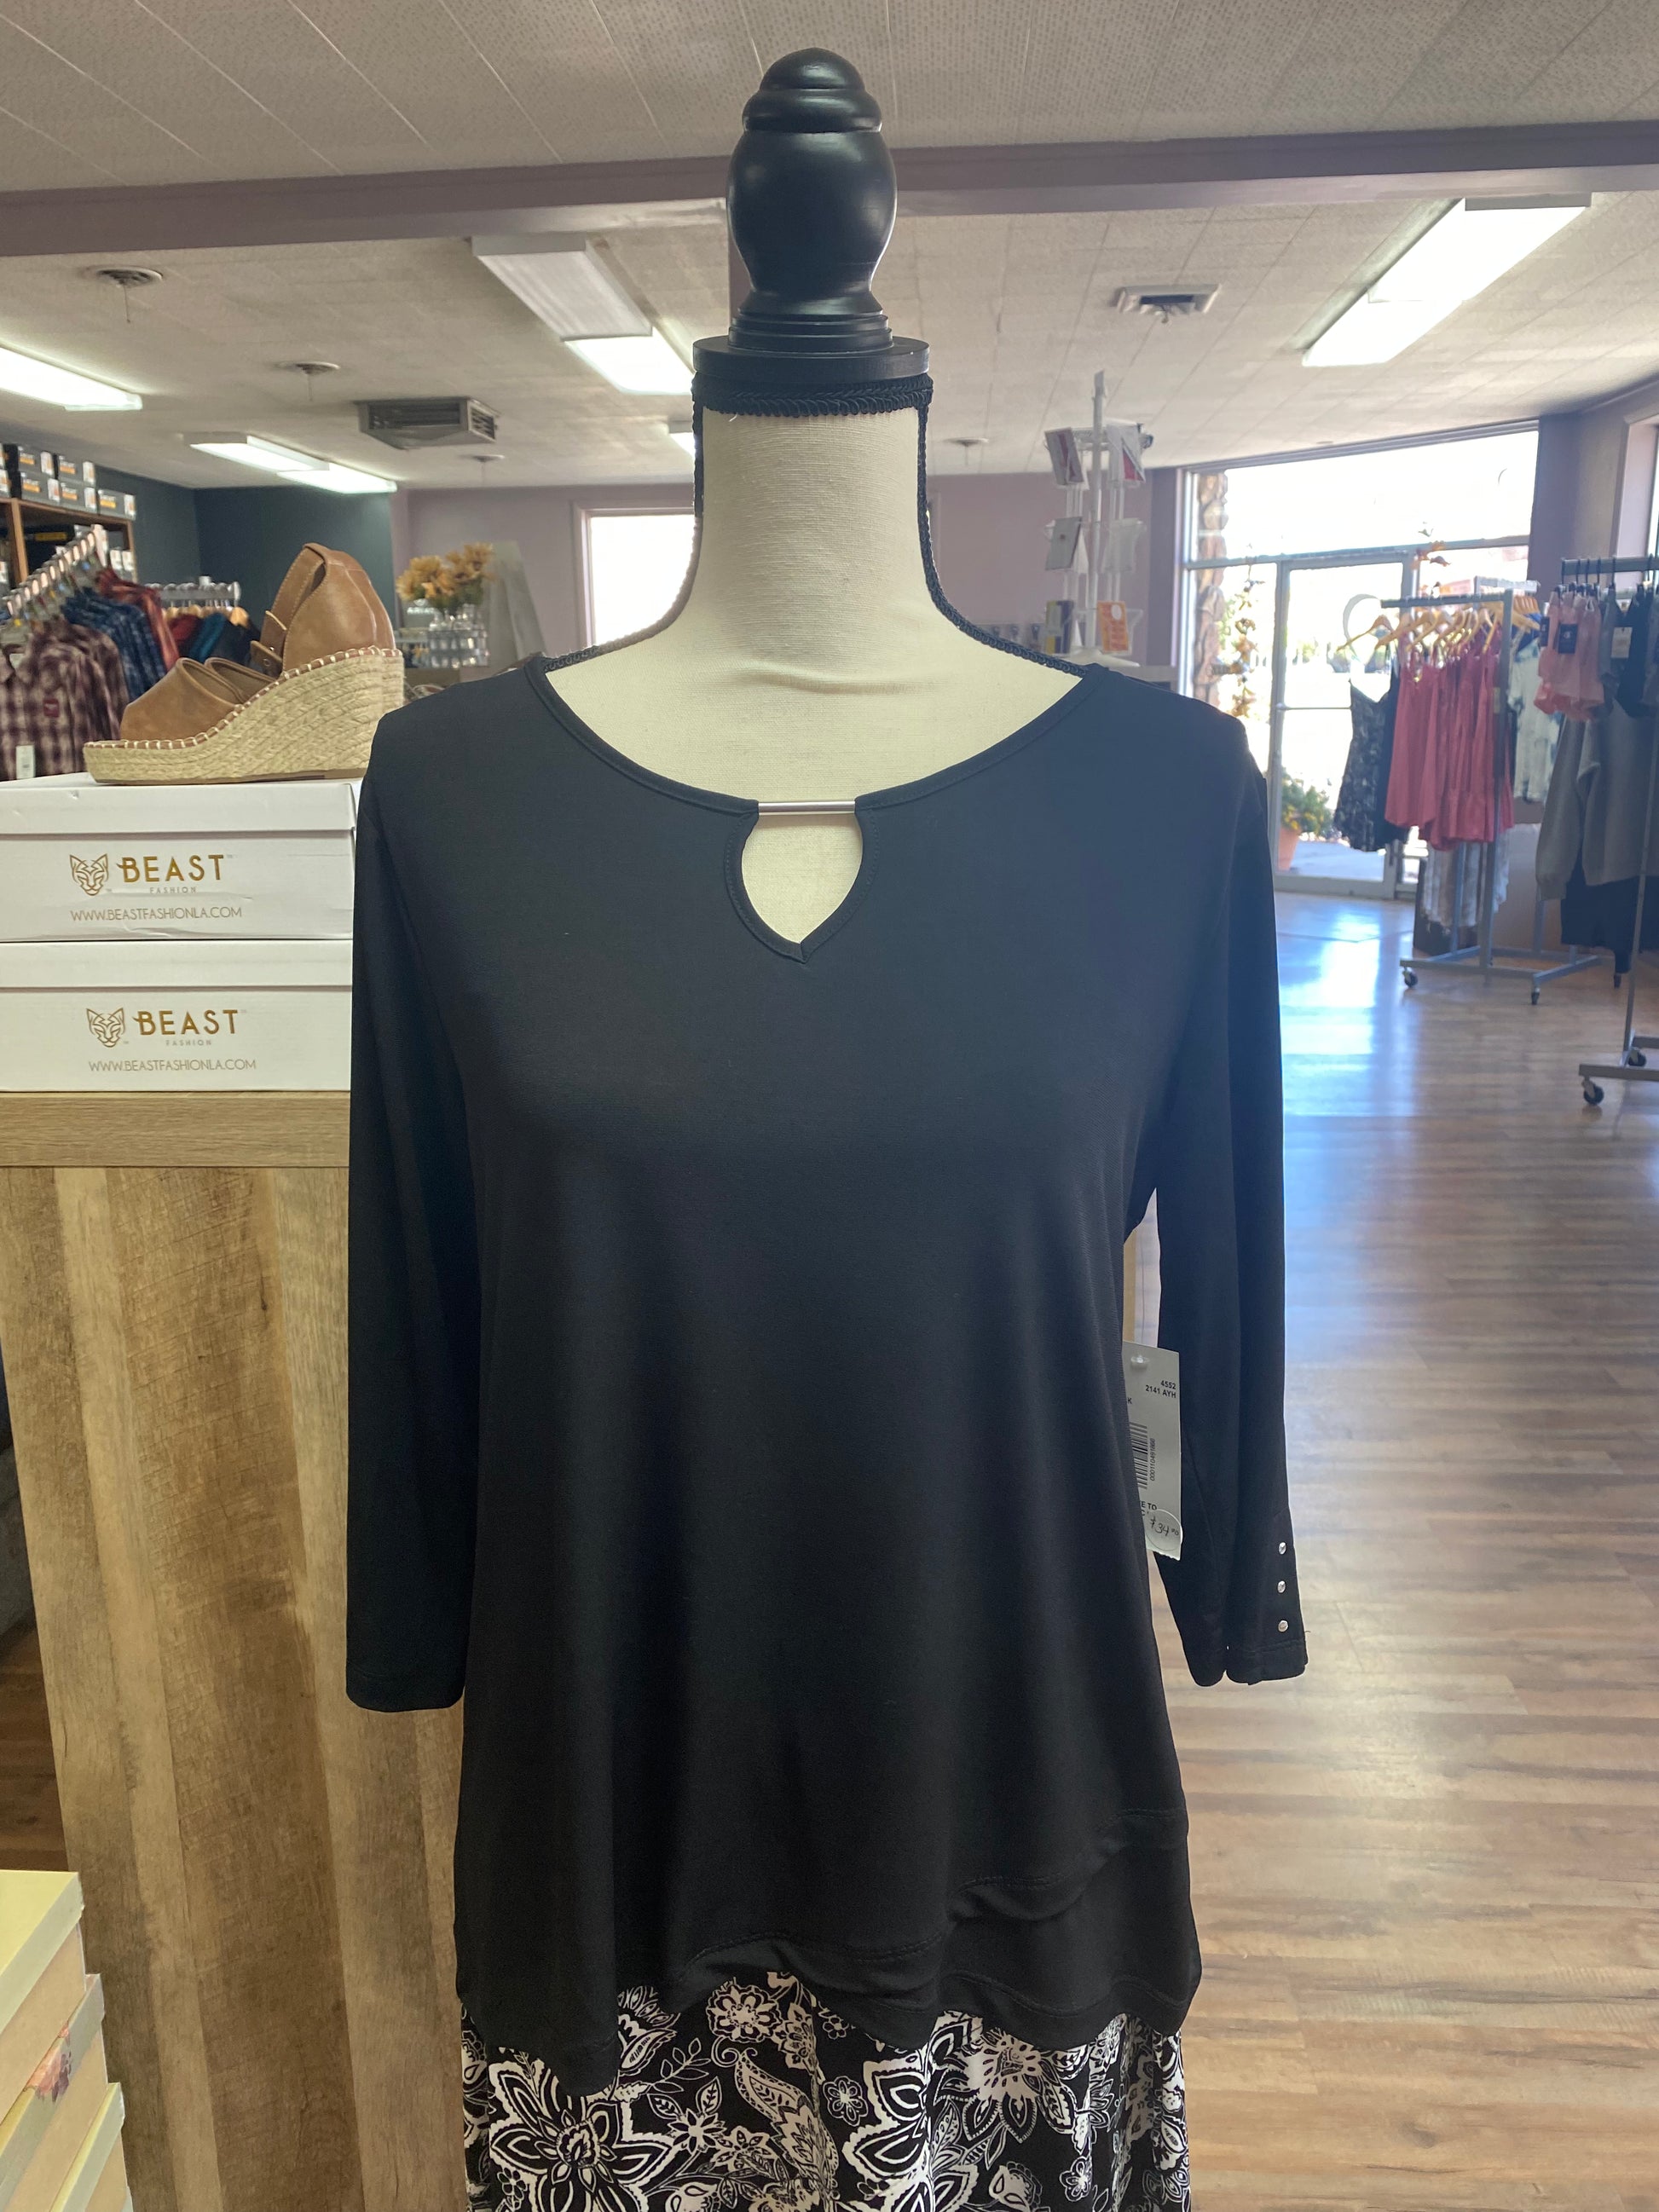 Southern Lady Black 3/4 Sleeve Top - Whitt & Co. Clothing